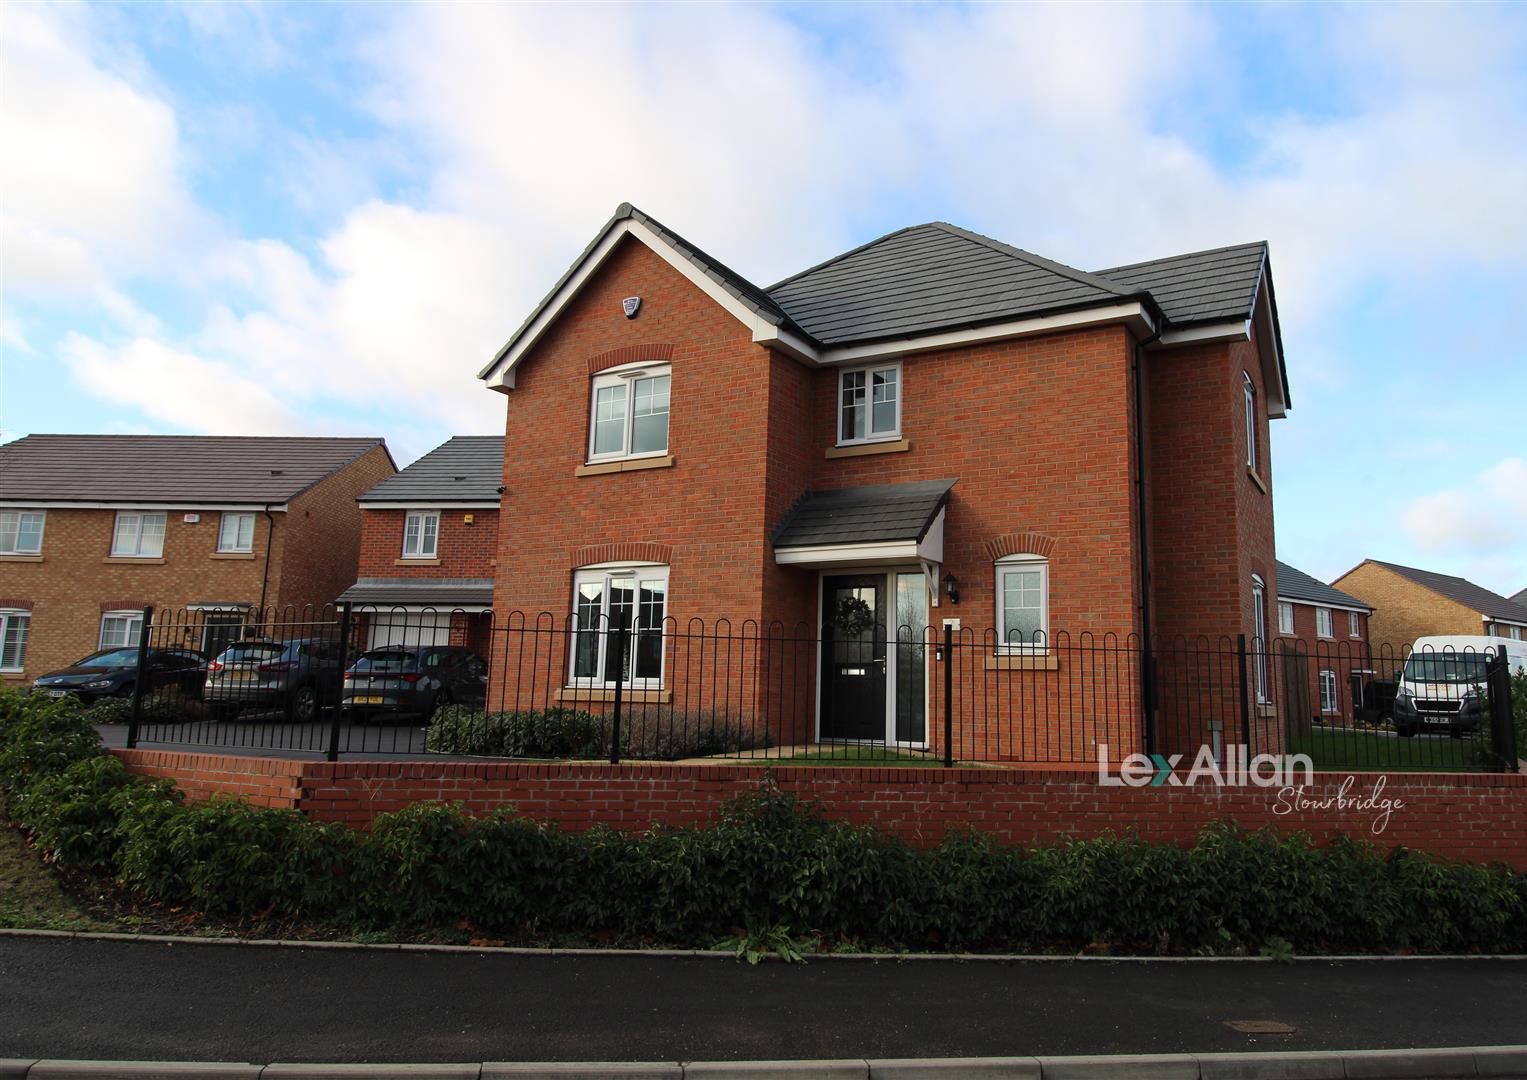 4 bed detached house for sale in Herringbone Way, Kingswinford, DY6 